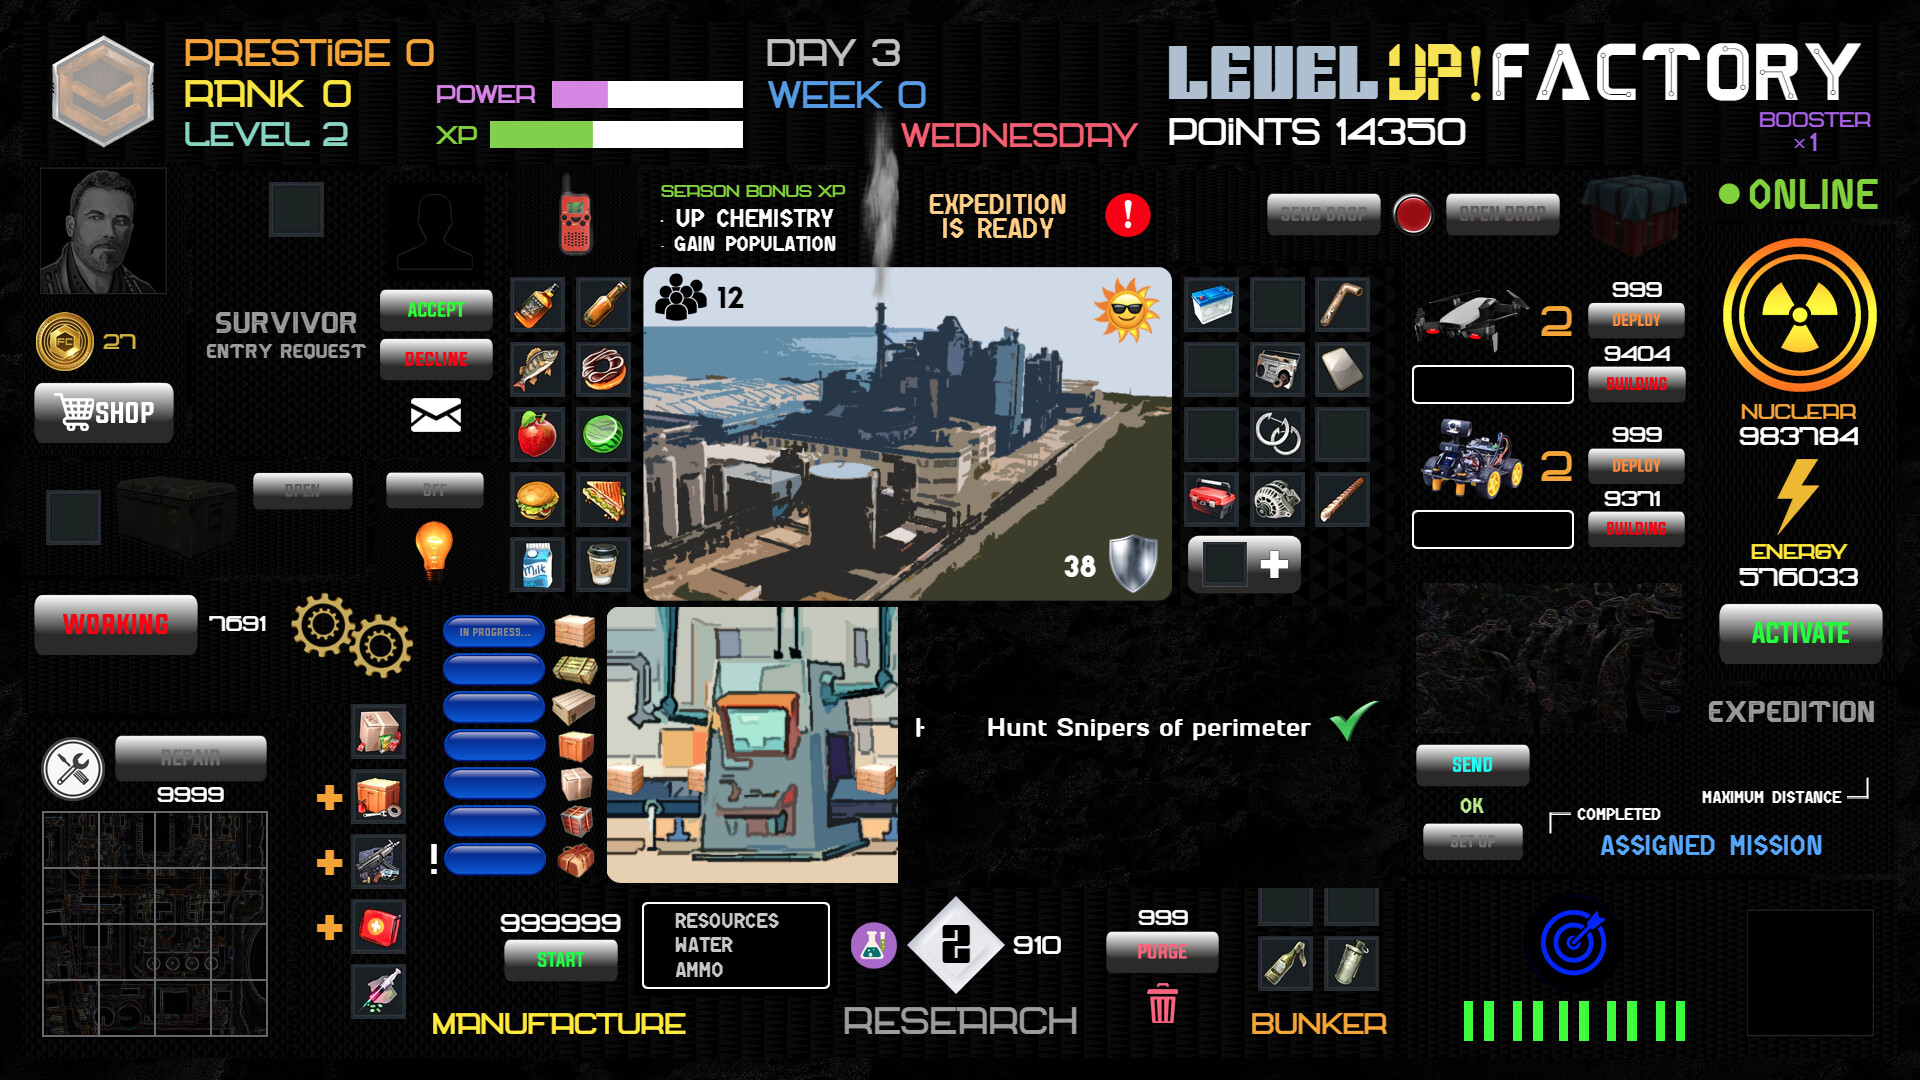 Level UP! Factory - Win - (Steam)